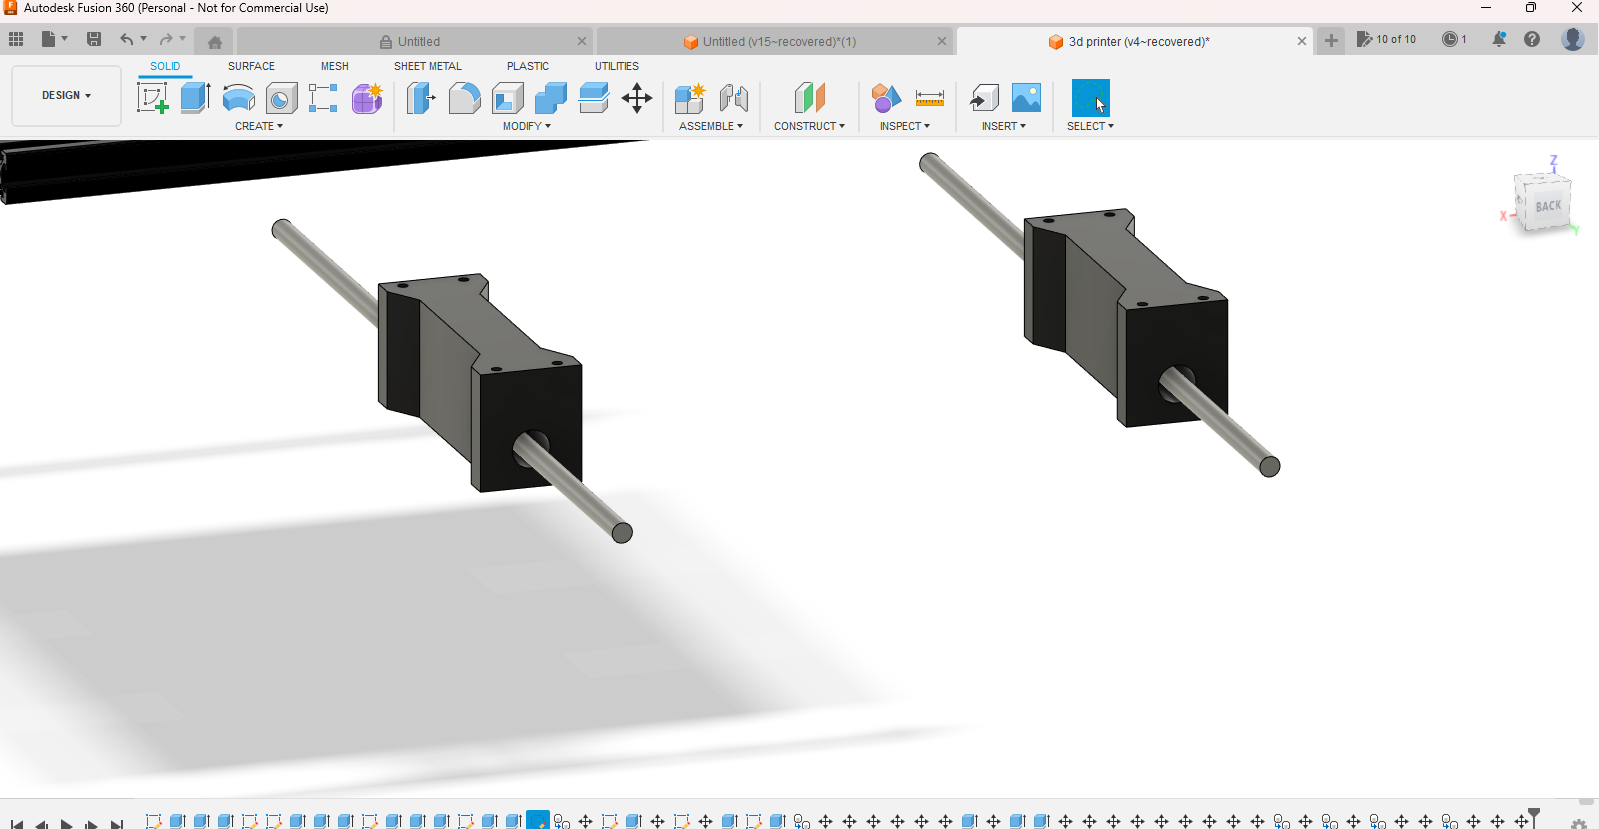 Autodesk Fusion 360 (Personal - Not for Commercial Use) 5_31_2023 7_44_46 PM.png